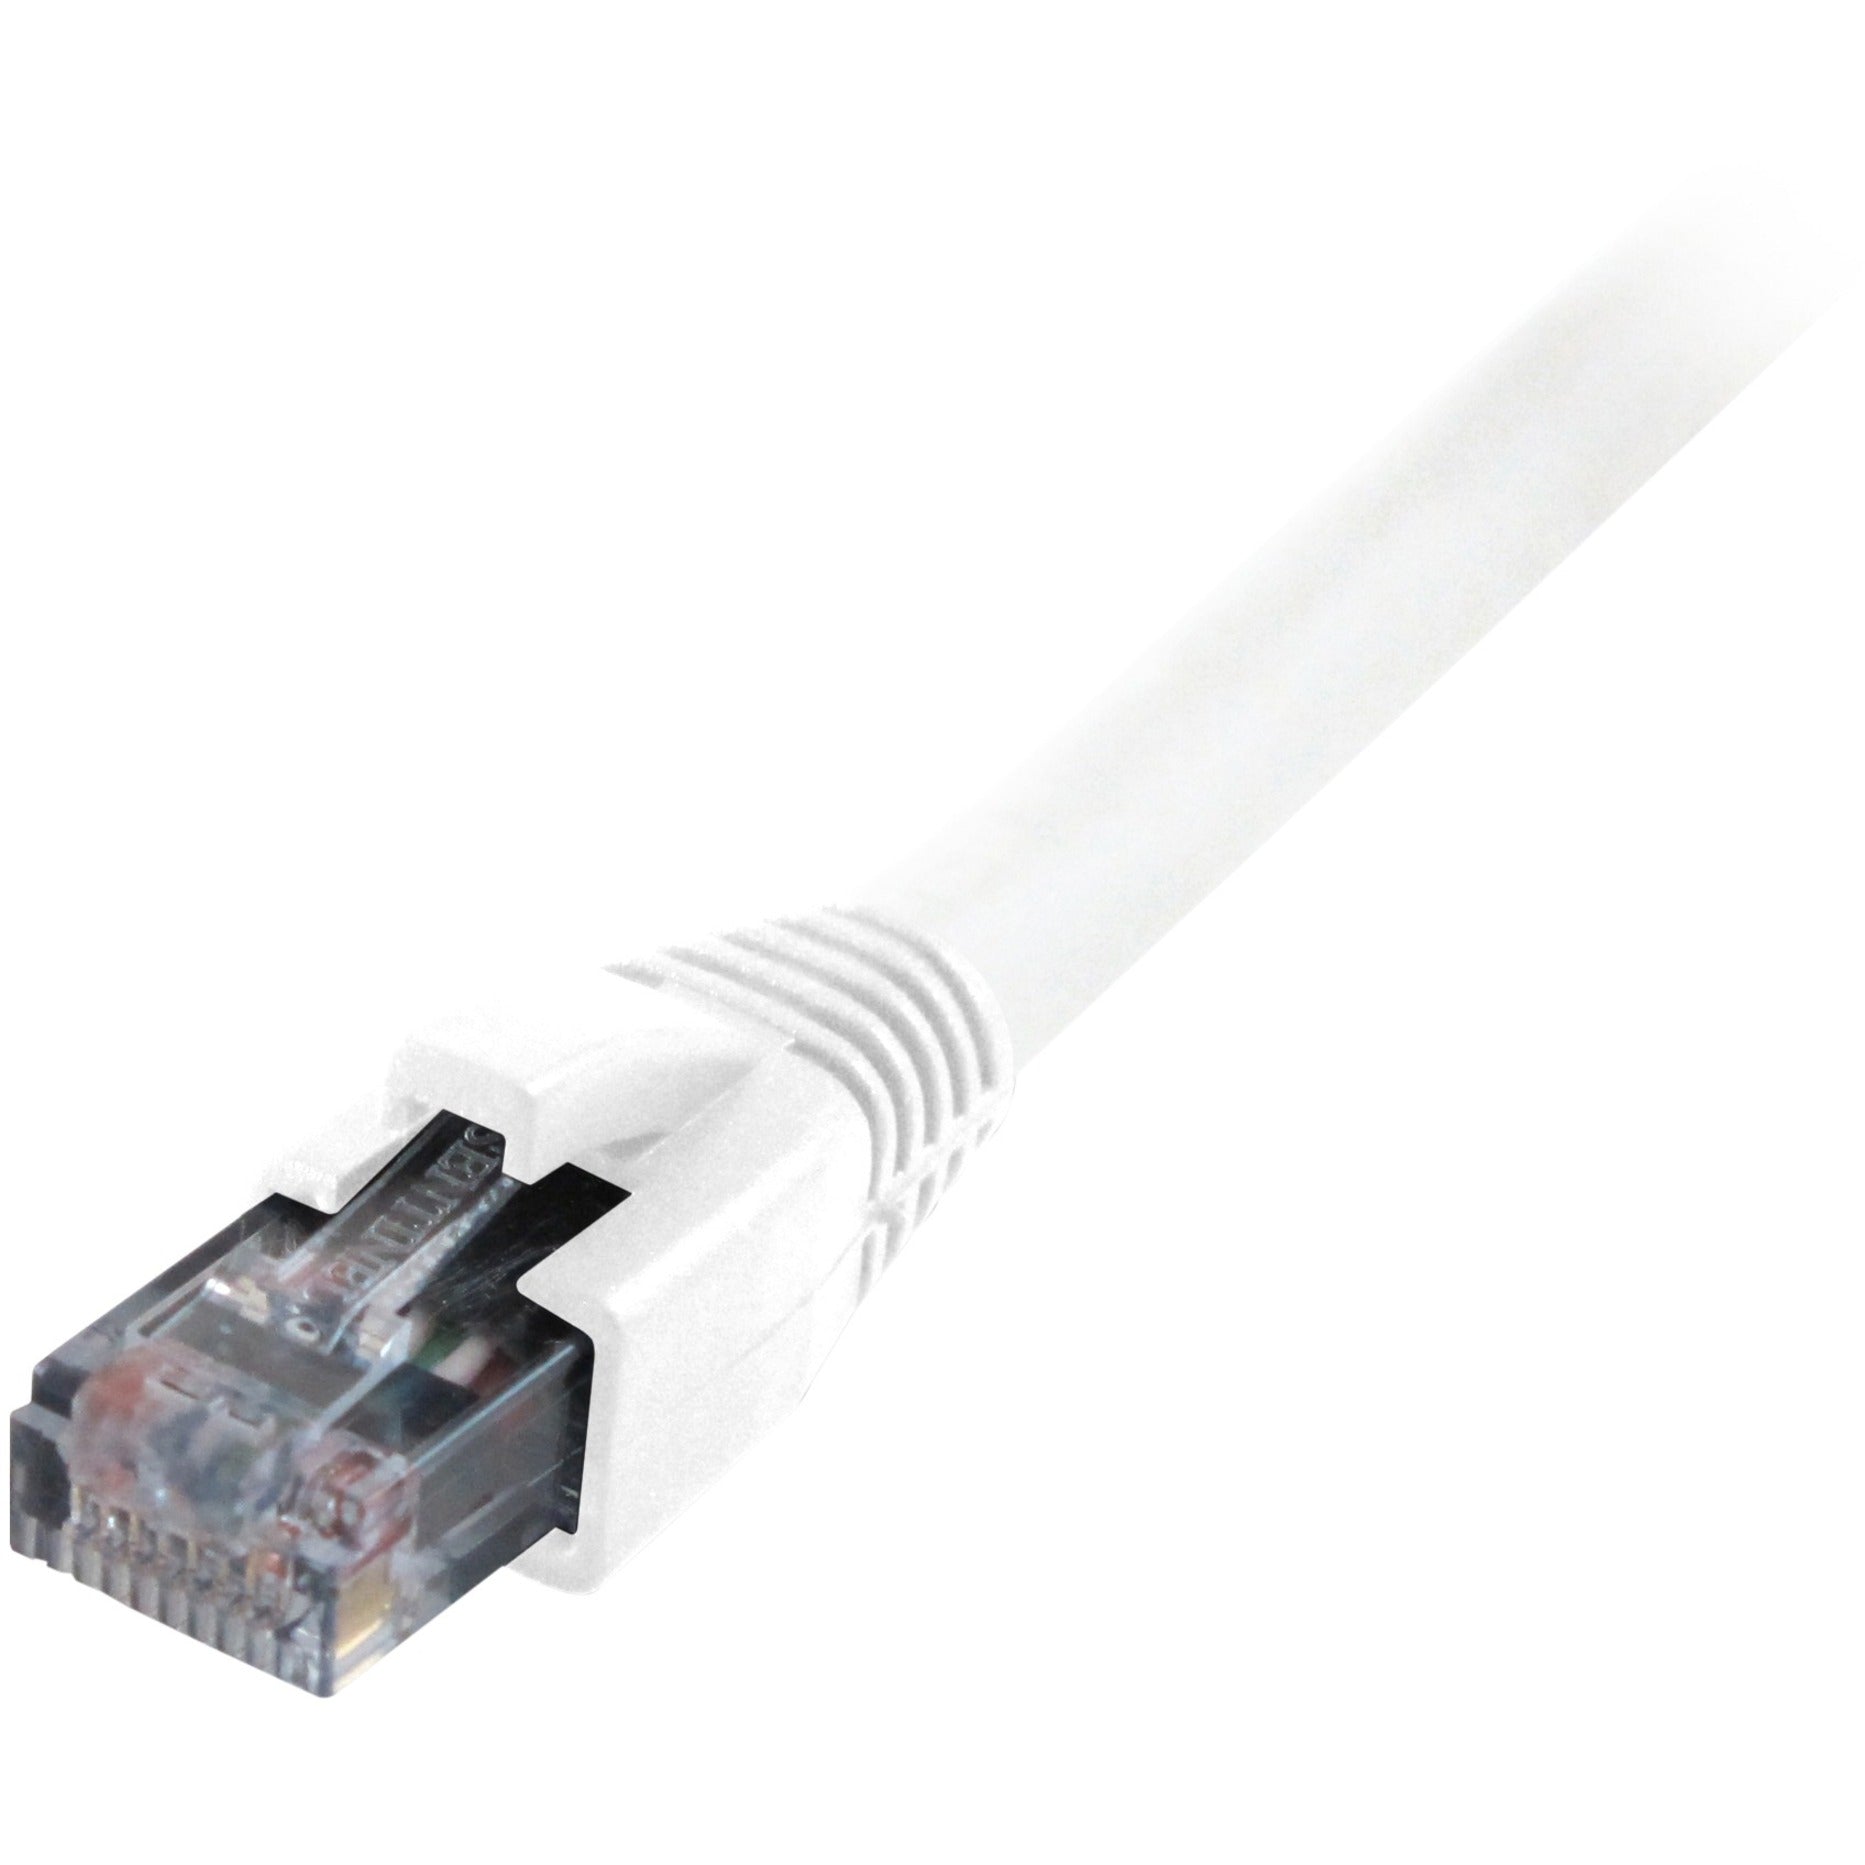 Comprehensive CAT6-3WHT Cat6 550 Mhz Snagless Patch Cable 3ft White, Molded, Strain Relief, Stranded, Booted, 1 Gbit/s Data Transfer Rate